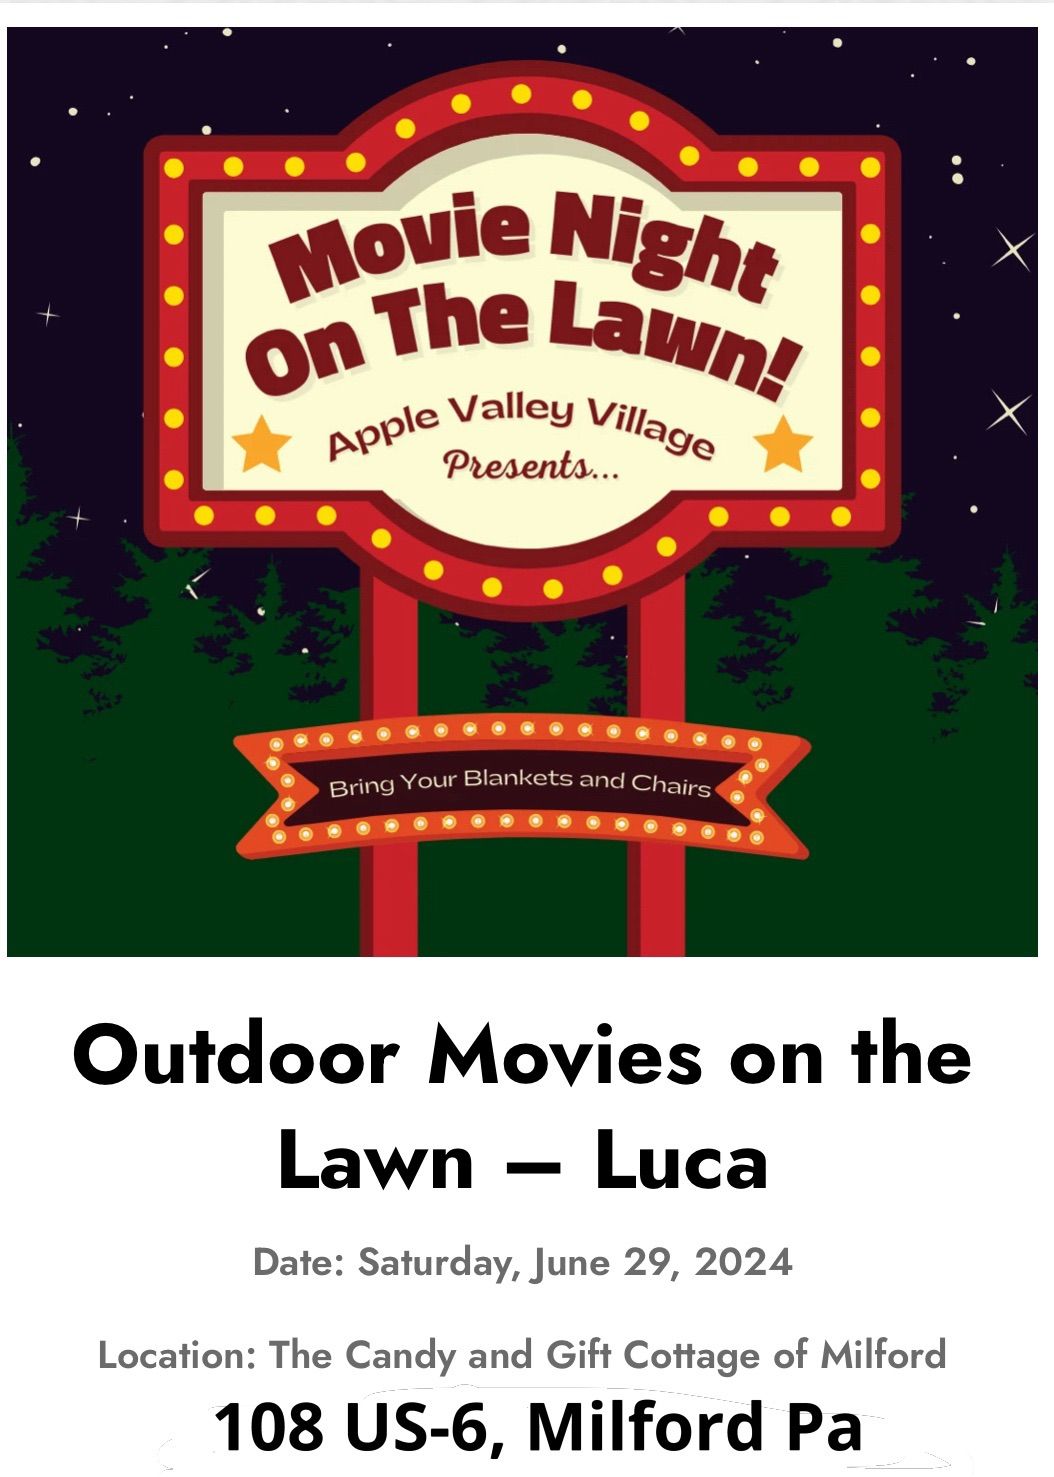 Movies on the Lawn - Luca